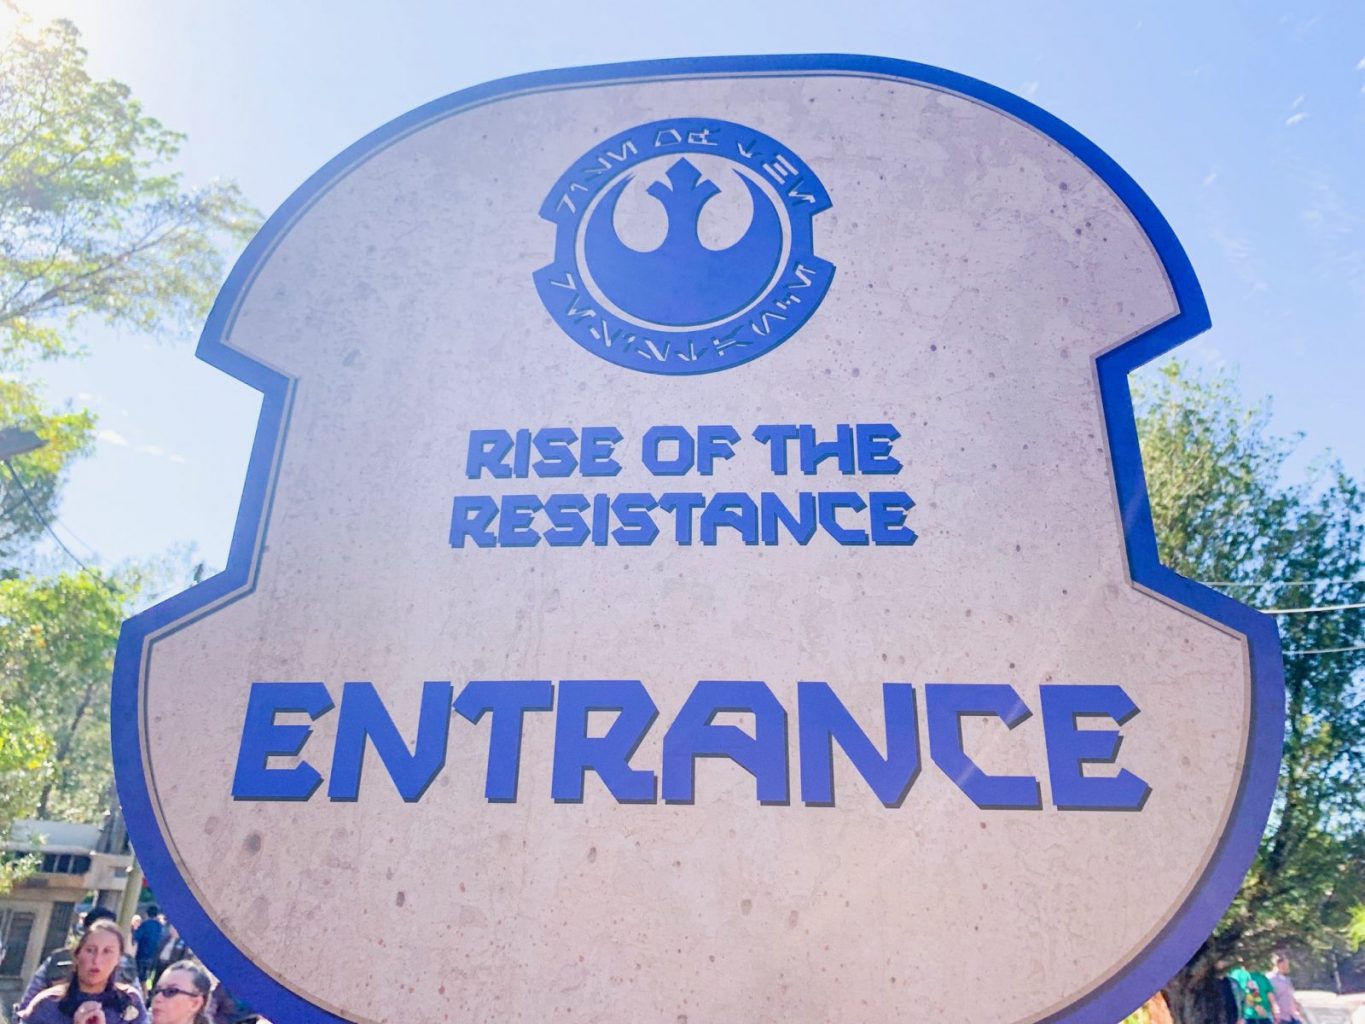 entrance sign for Rise of the Resistance